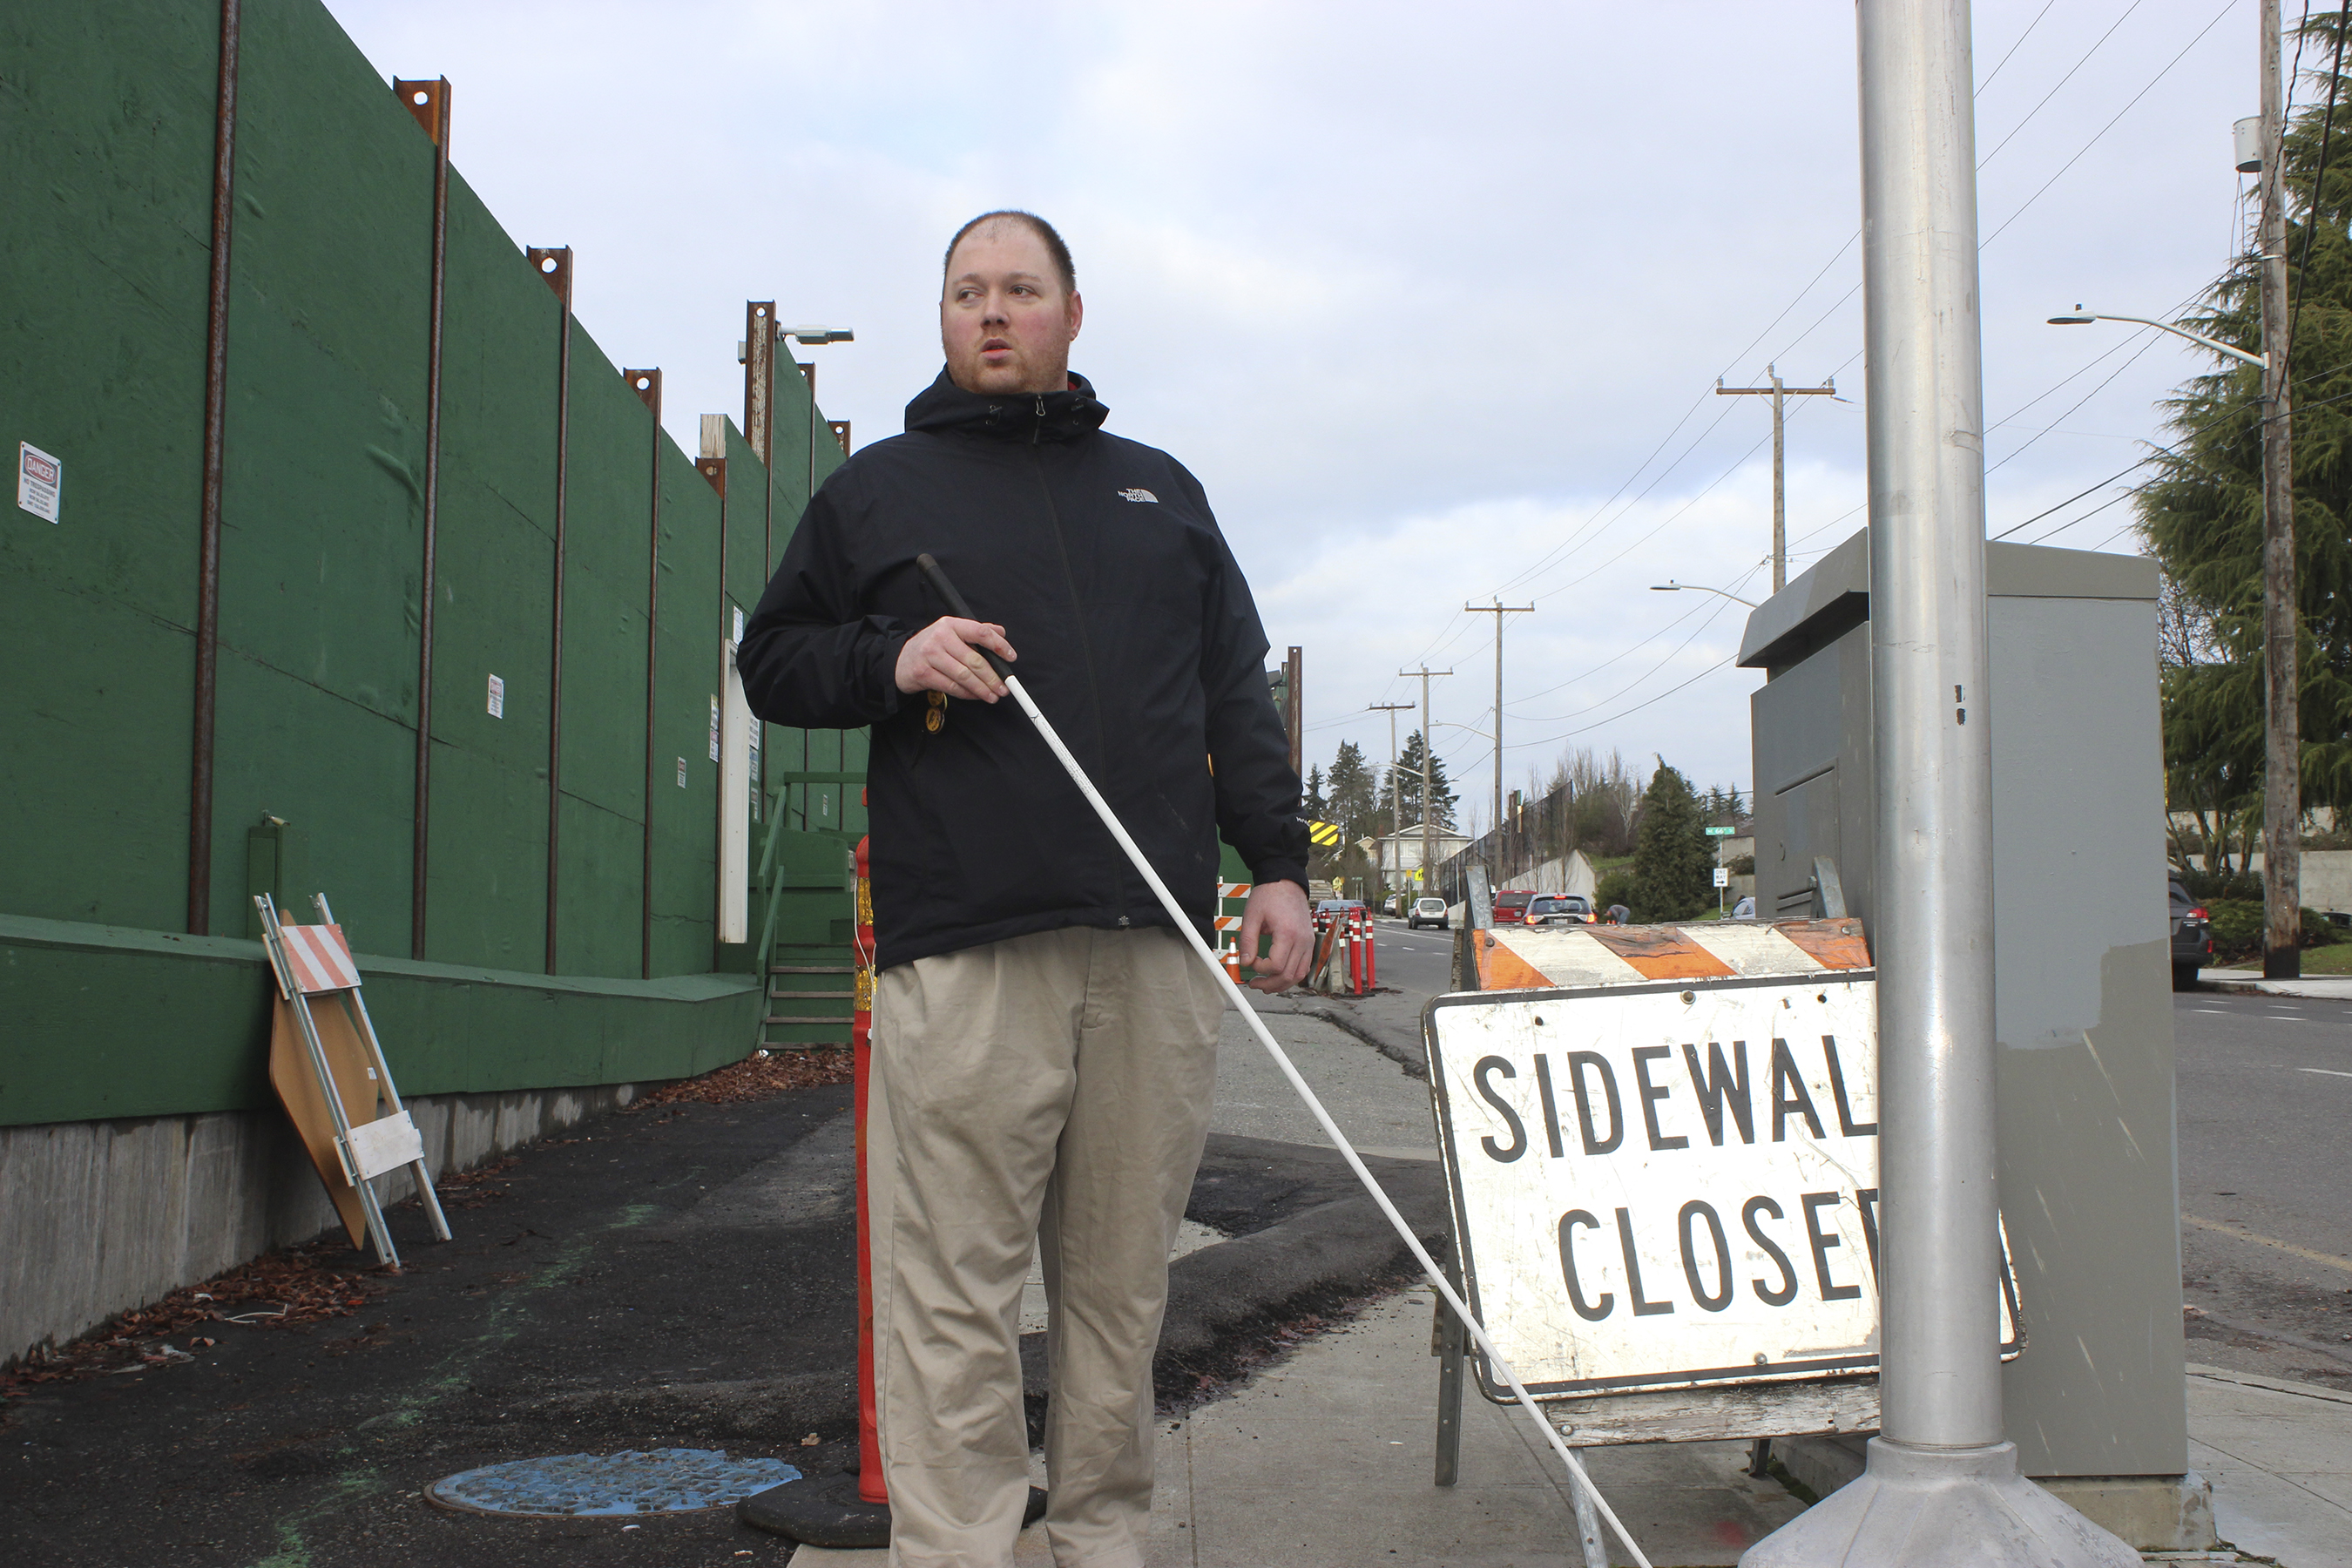 Jacob Struiksma stands at a construction site in Roosevelt.